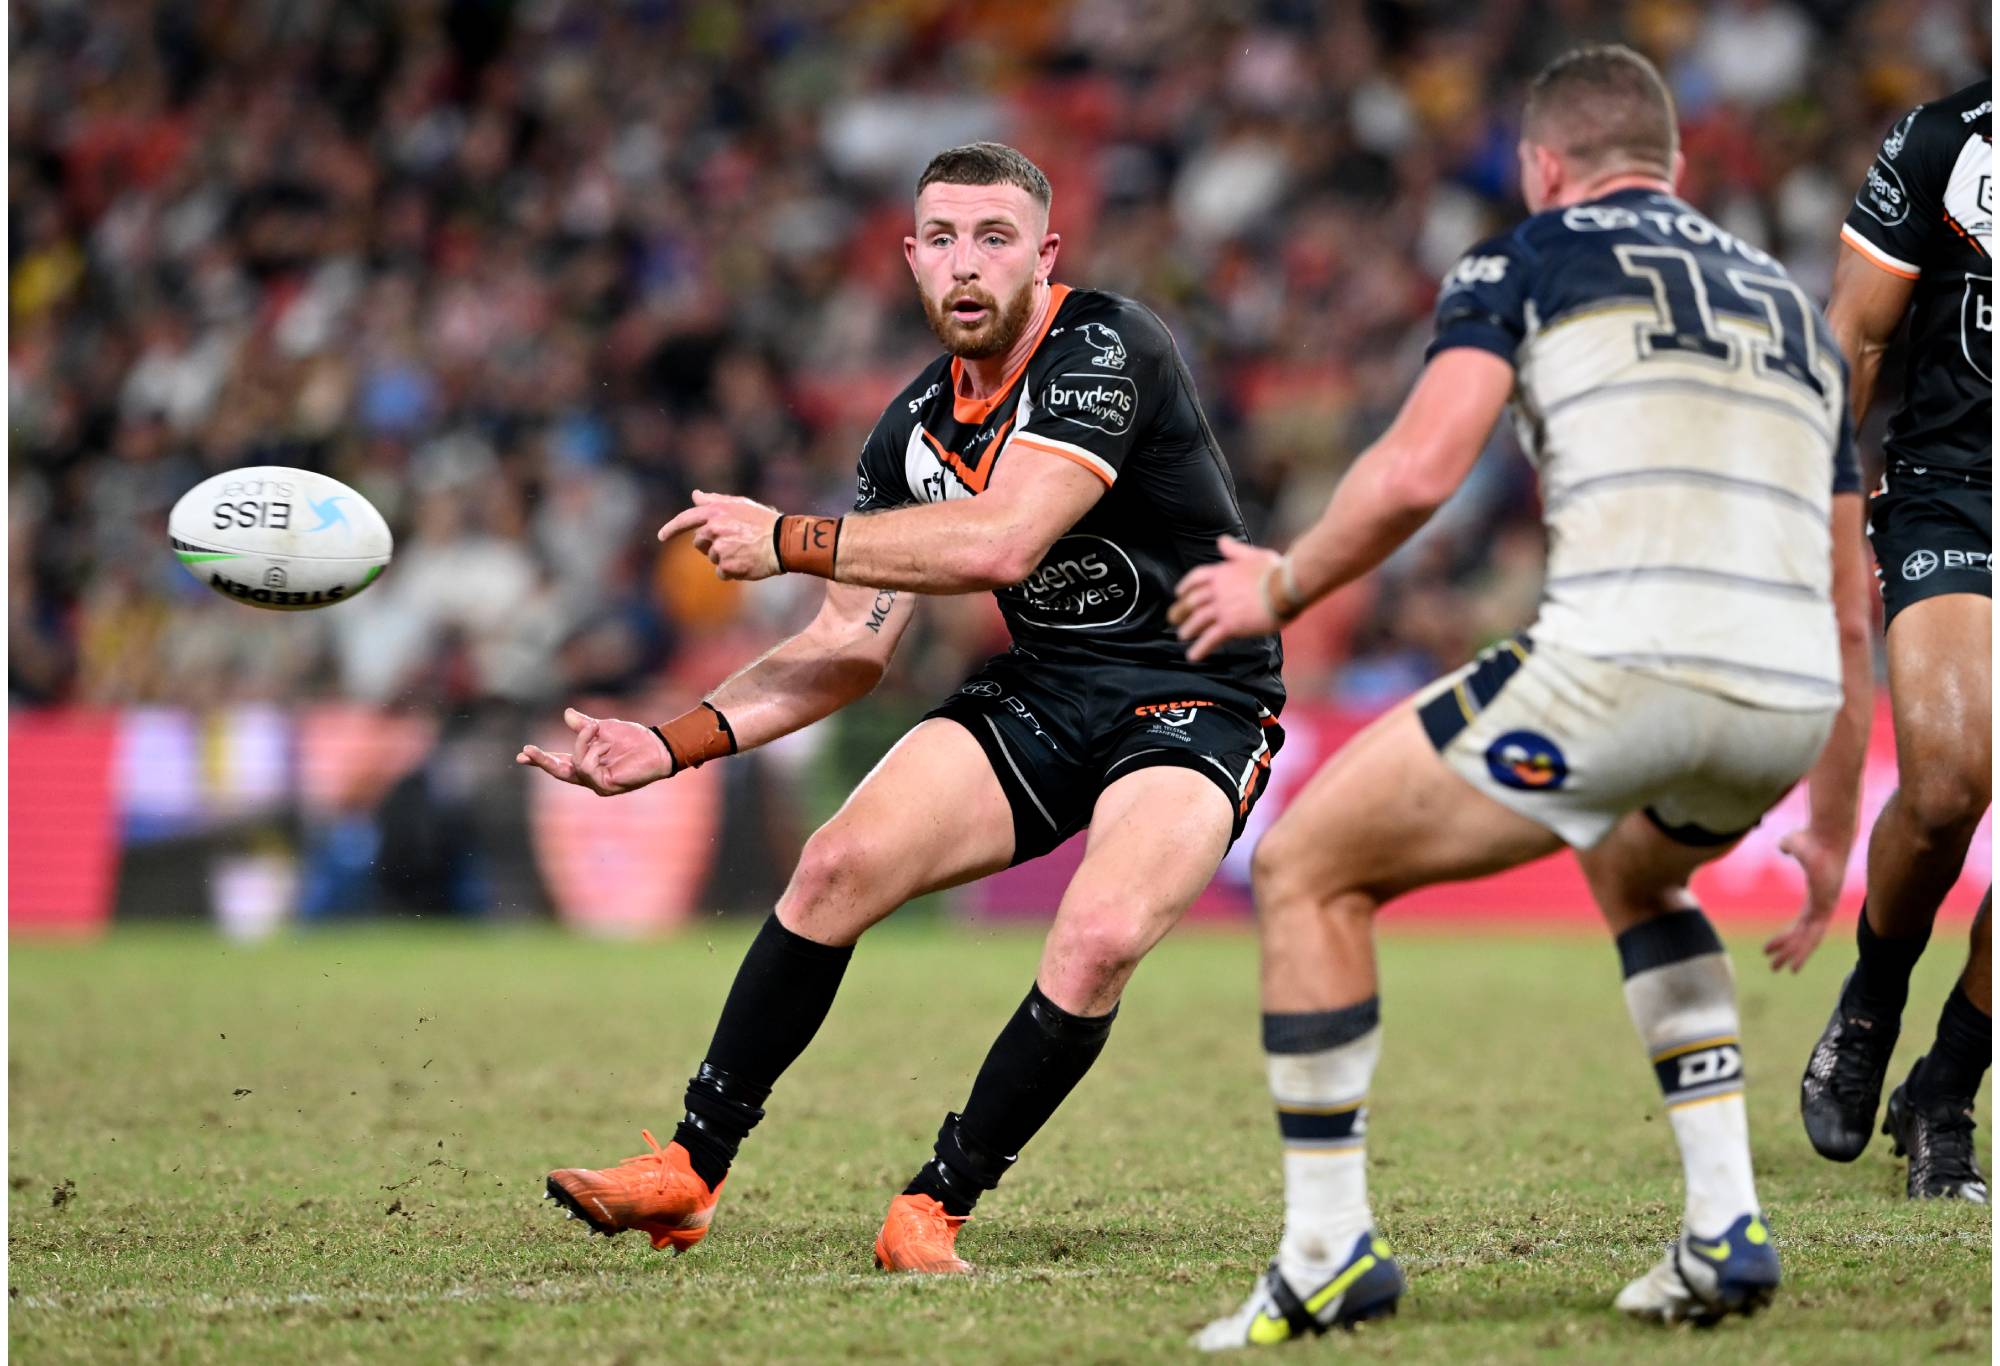 BRISBANE, AUSTRALIA - MAY 15: Jackson Hastings of the Tigers passes the ball during the round 10 NRL match between the Wests Tigers and the North Queensland Cowboys at Suncorp Stadium, on May 15, 2022, in Brisbane, Australia. (Photo by Bradley Kanaris/Getty Images)